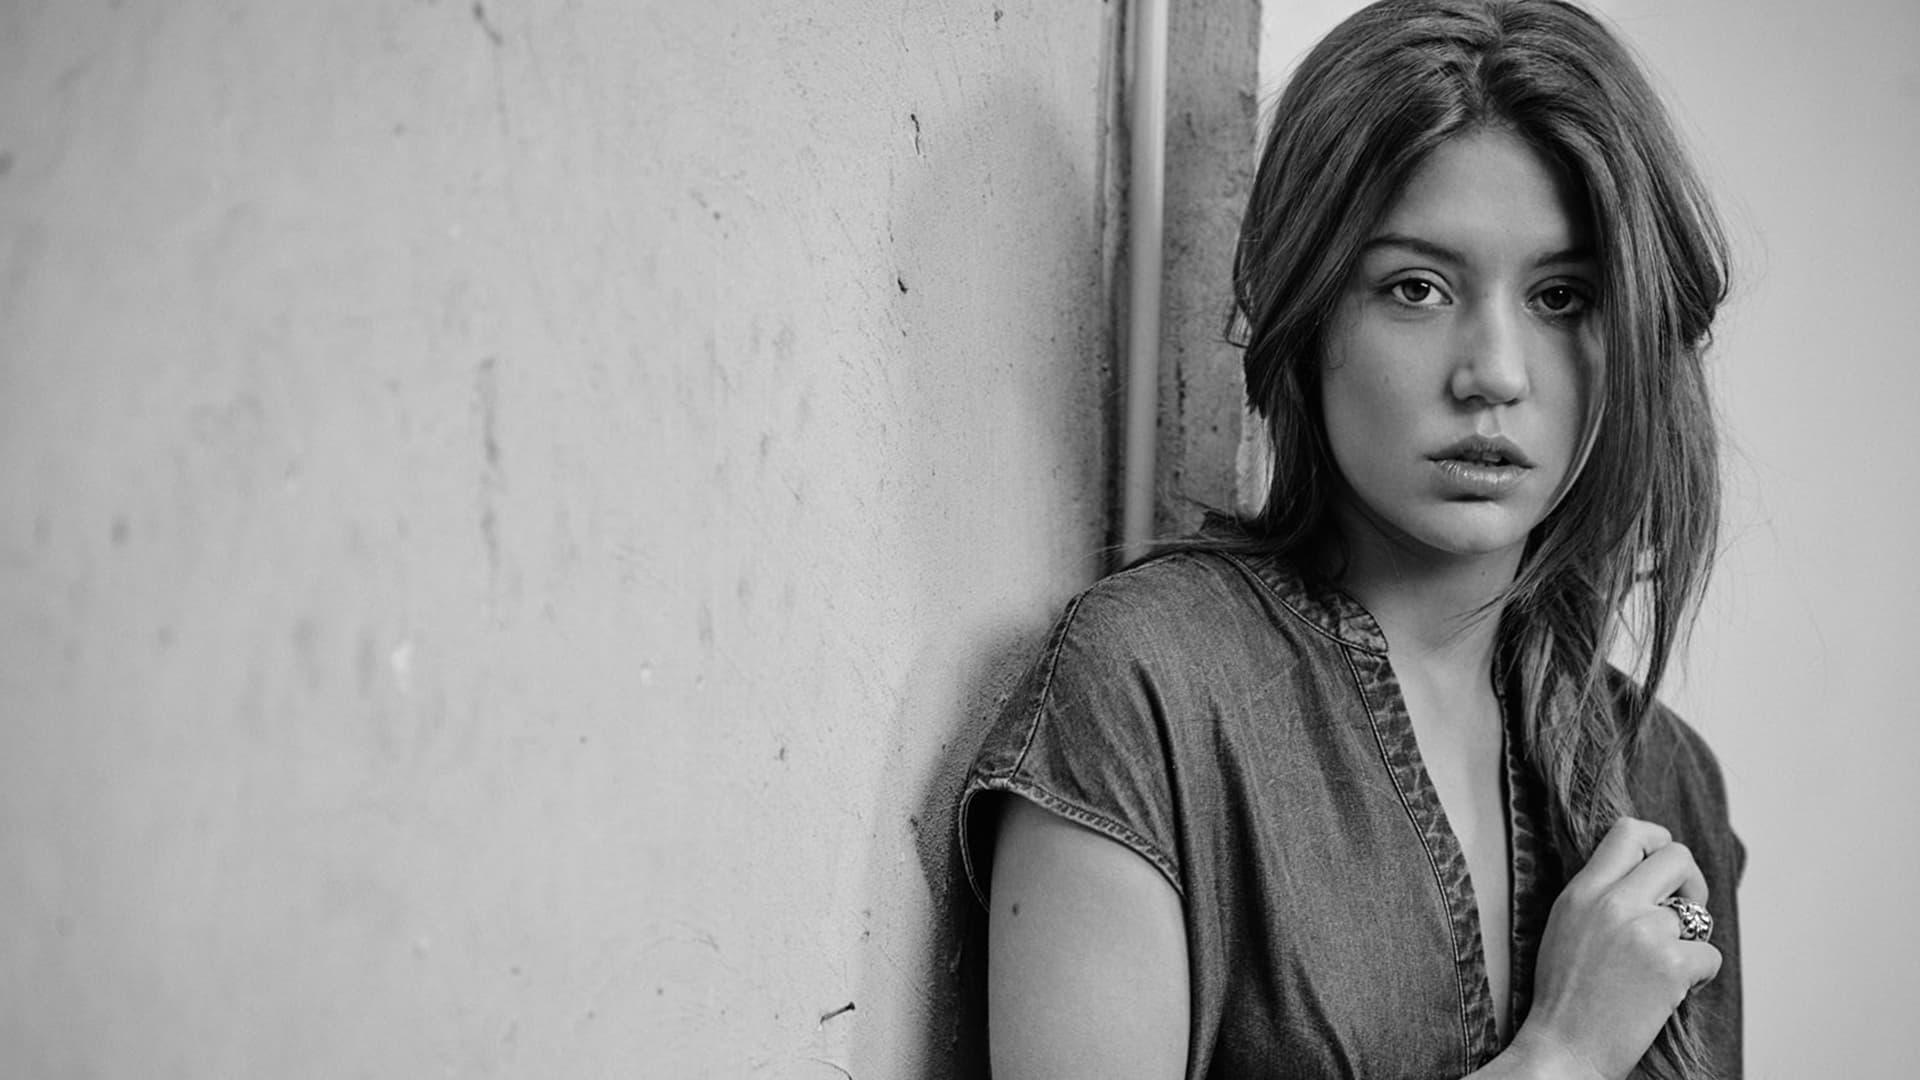 Wallpaper actress, black and white, Adele Exarchopoulos for mobile and  desktop, section девушки, resolution 1920x1281 - download